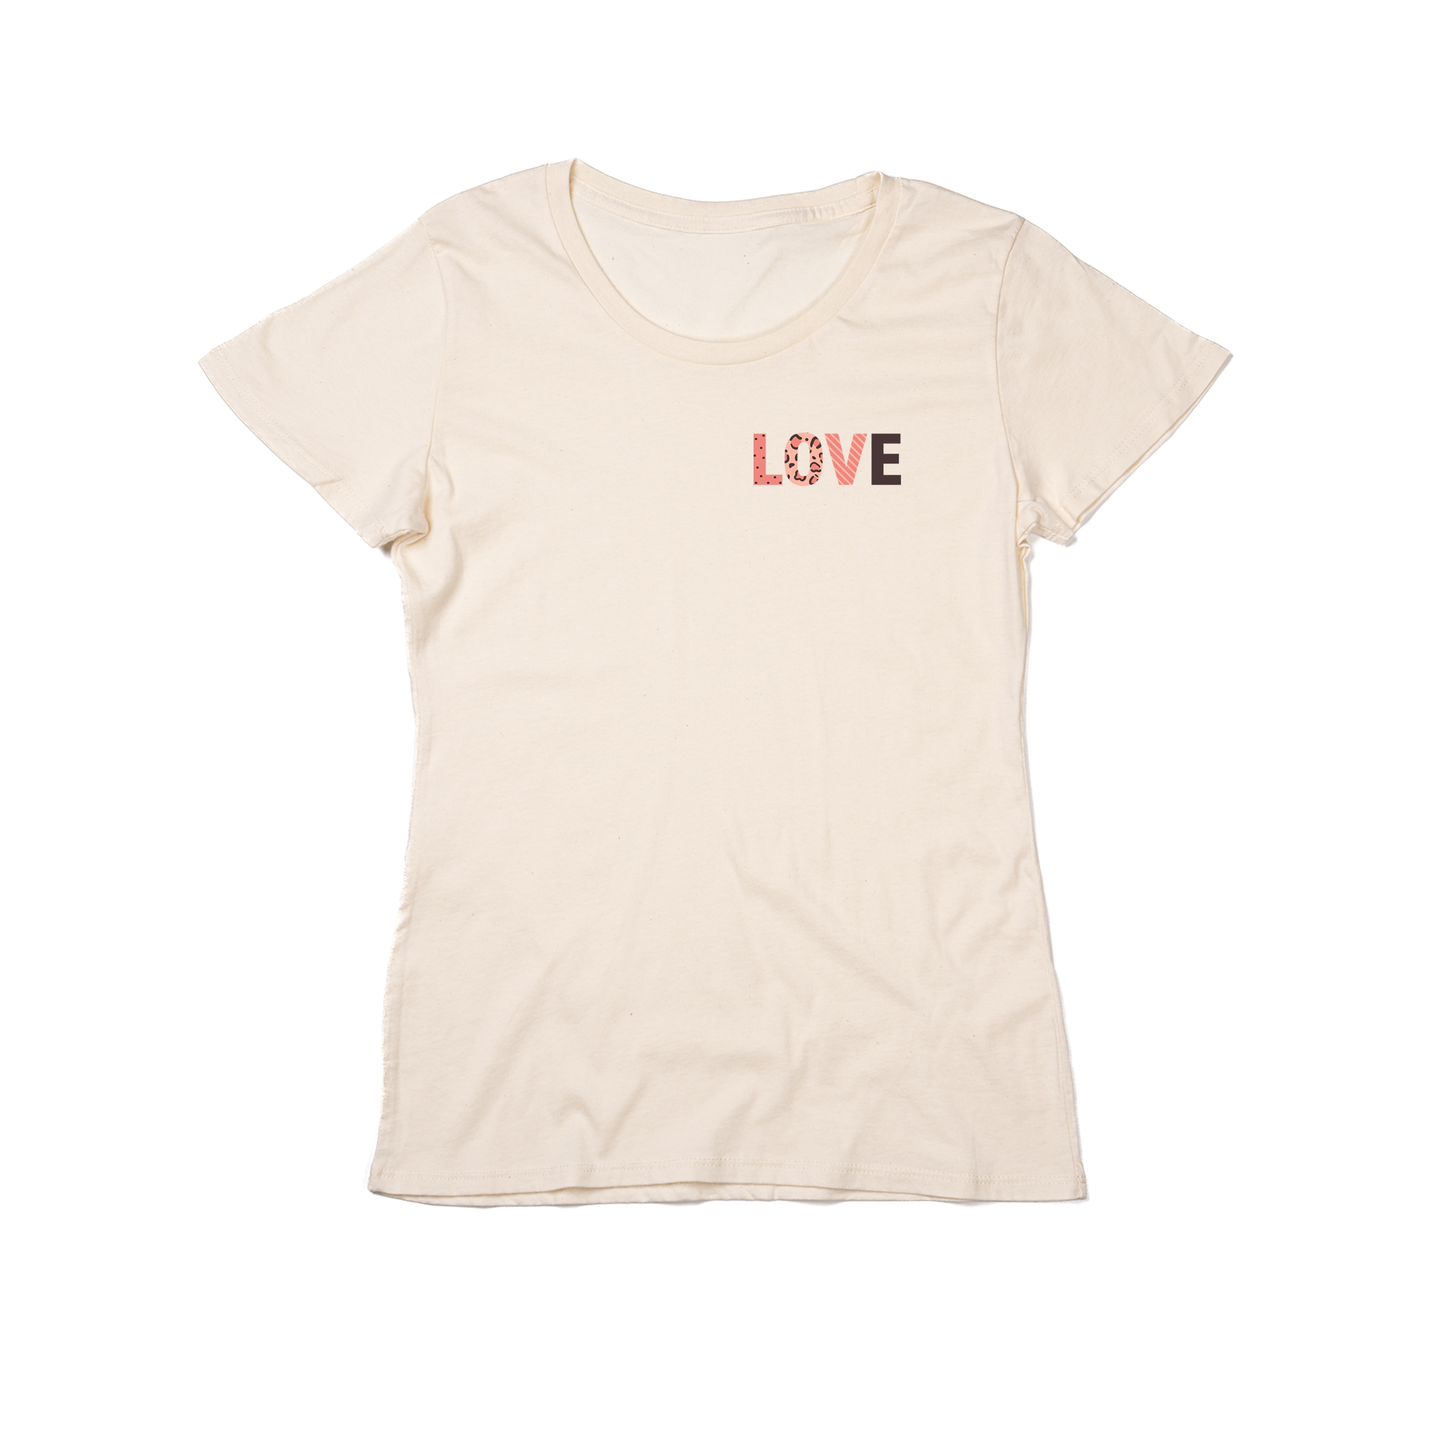 LOVE (Pocket) - Women's Fitted Tee (Natural)